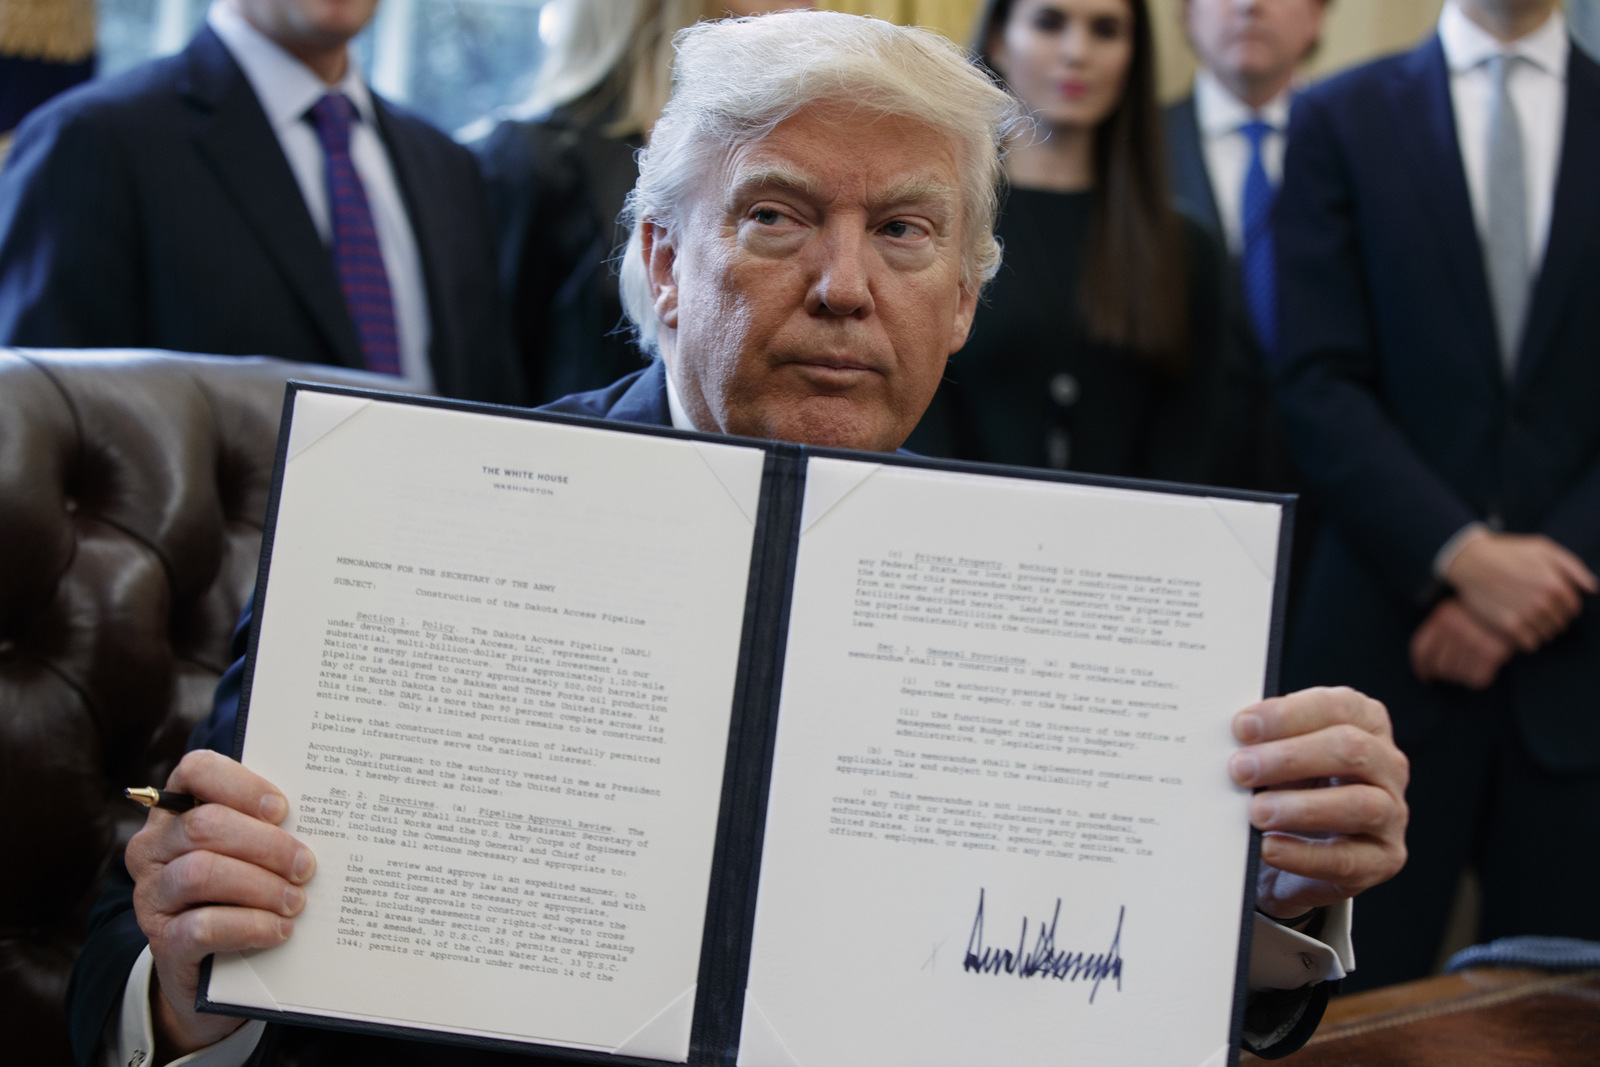 President Donald Trump shows off his signature on an executive order about the Dakota Access pipeline, Tuesday, Jan. 24, 2017, in the Oval Office of the White House in Washington. (AP/Evan Vucci)